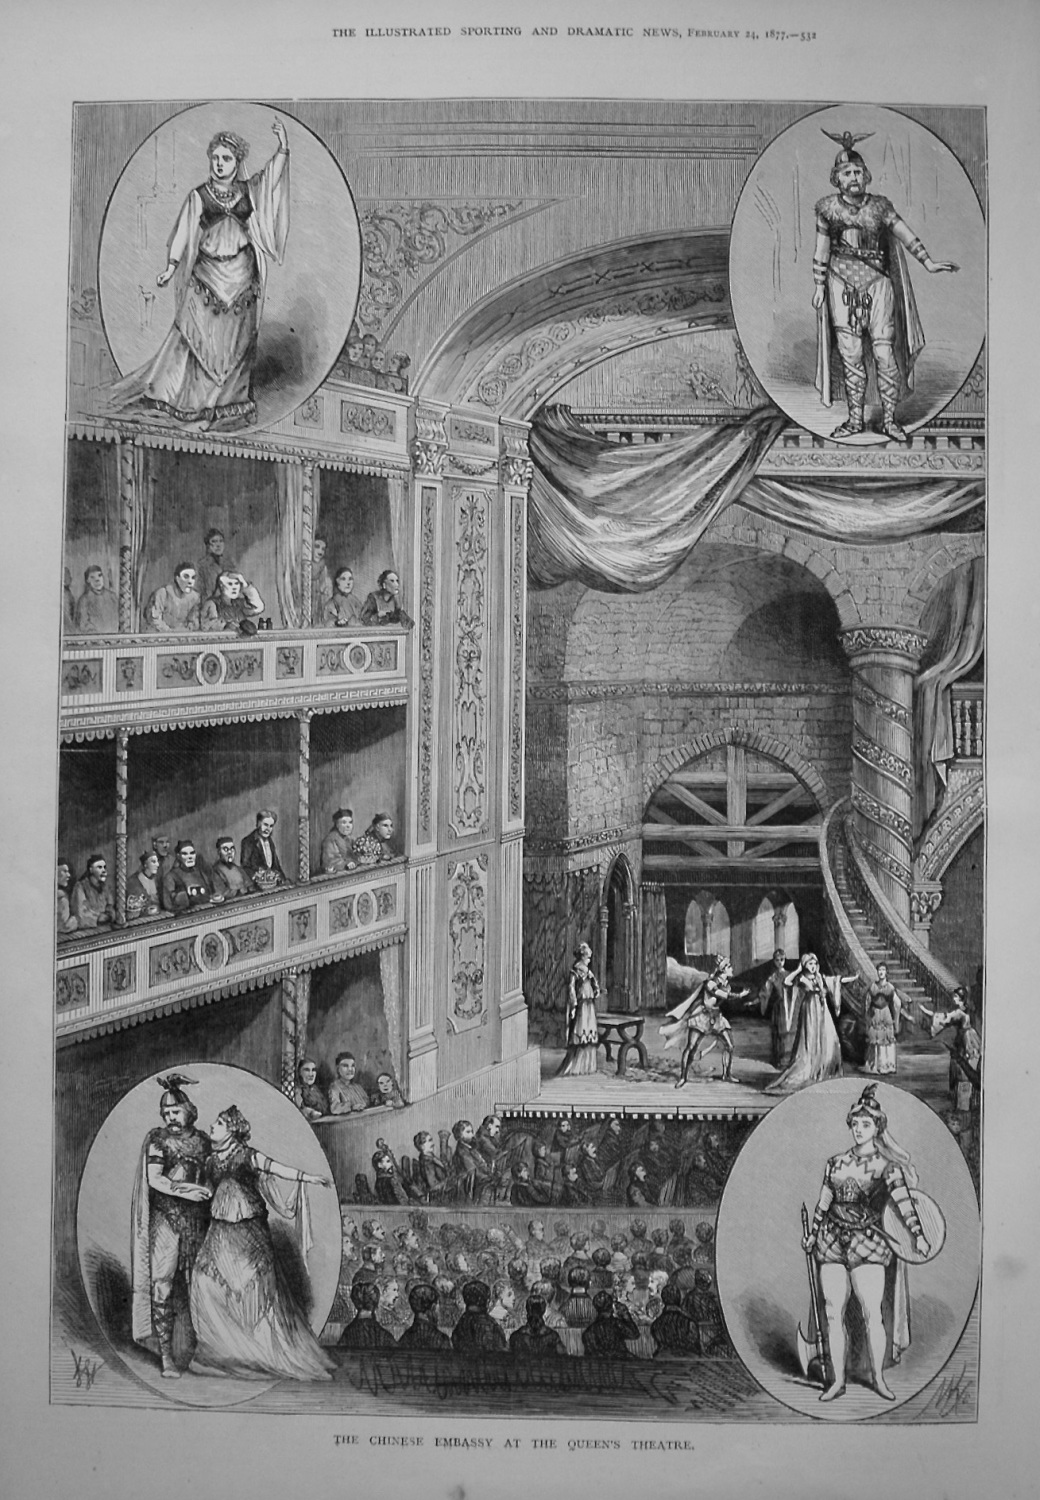 The Chinese Embassy at the Queen's Theatre. 1877